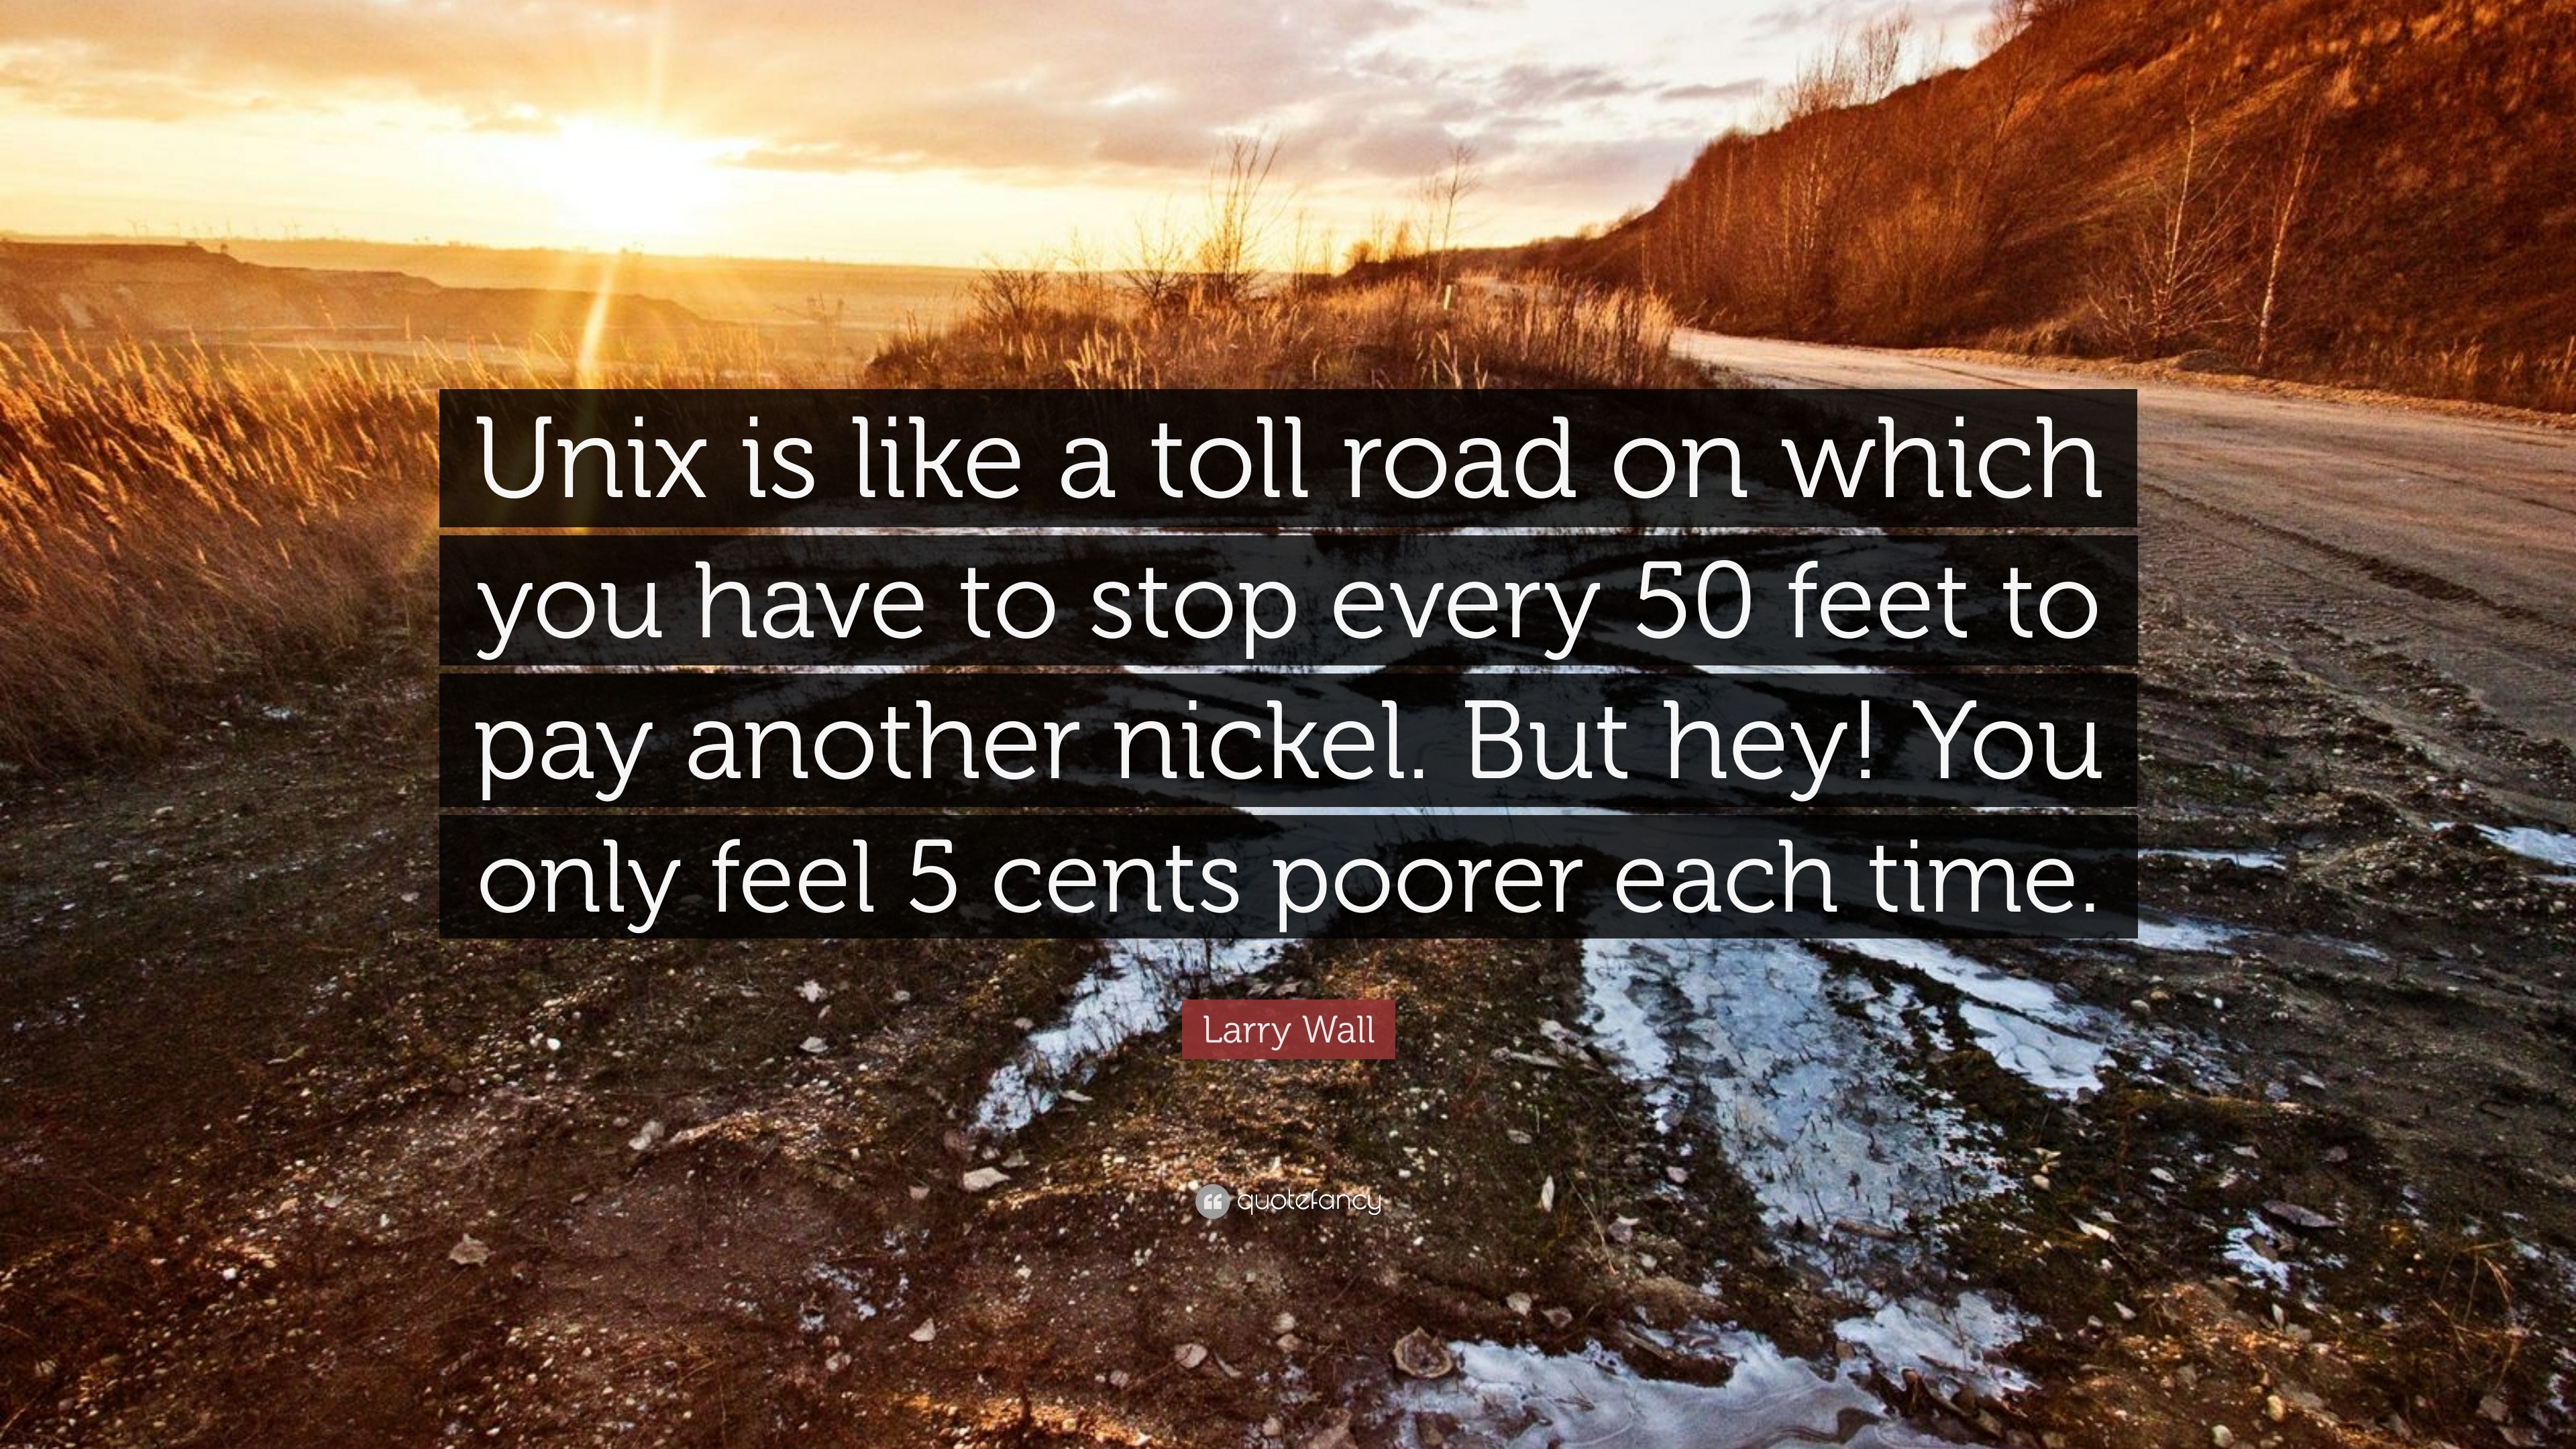 Larry Wall Quote: "Unix is like a toll road on which you ...